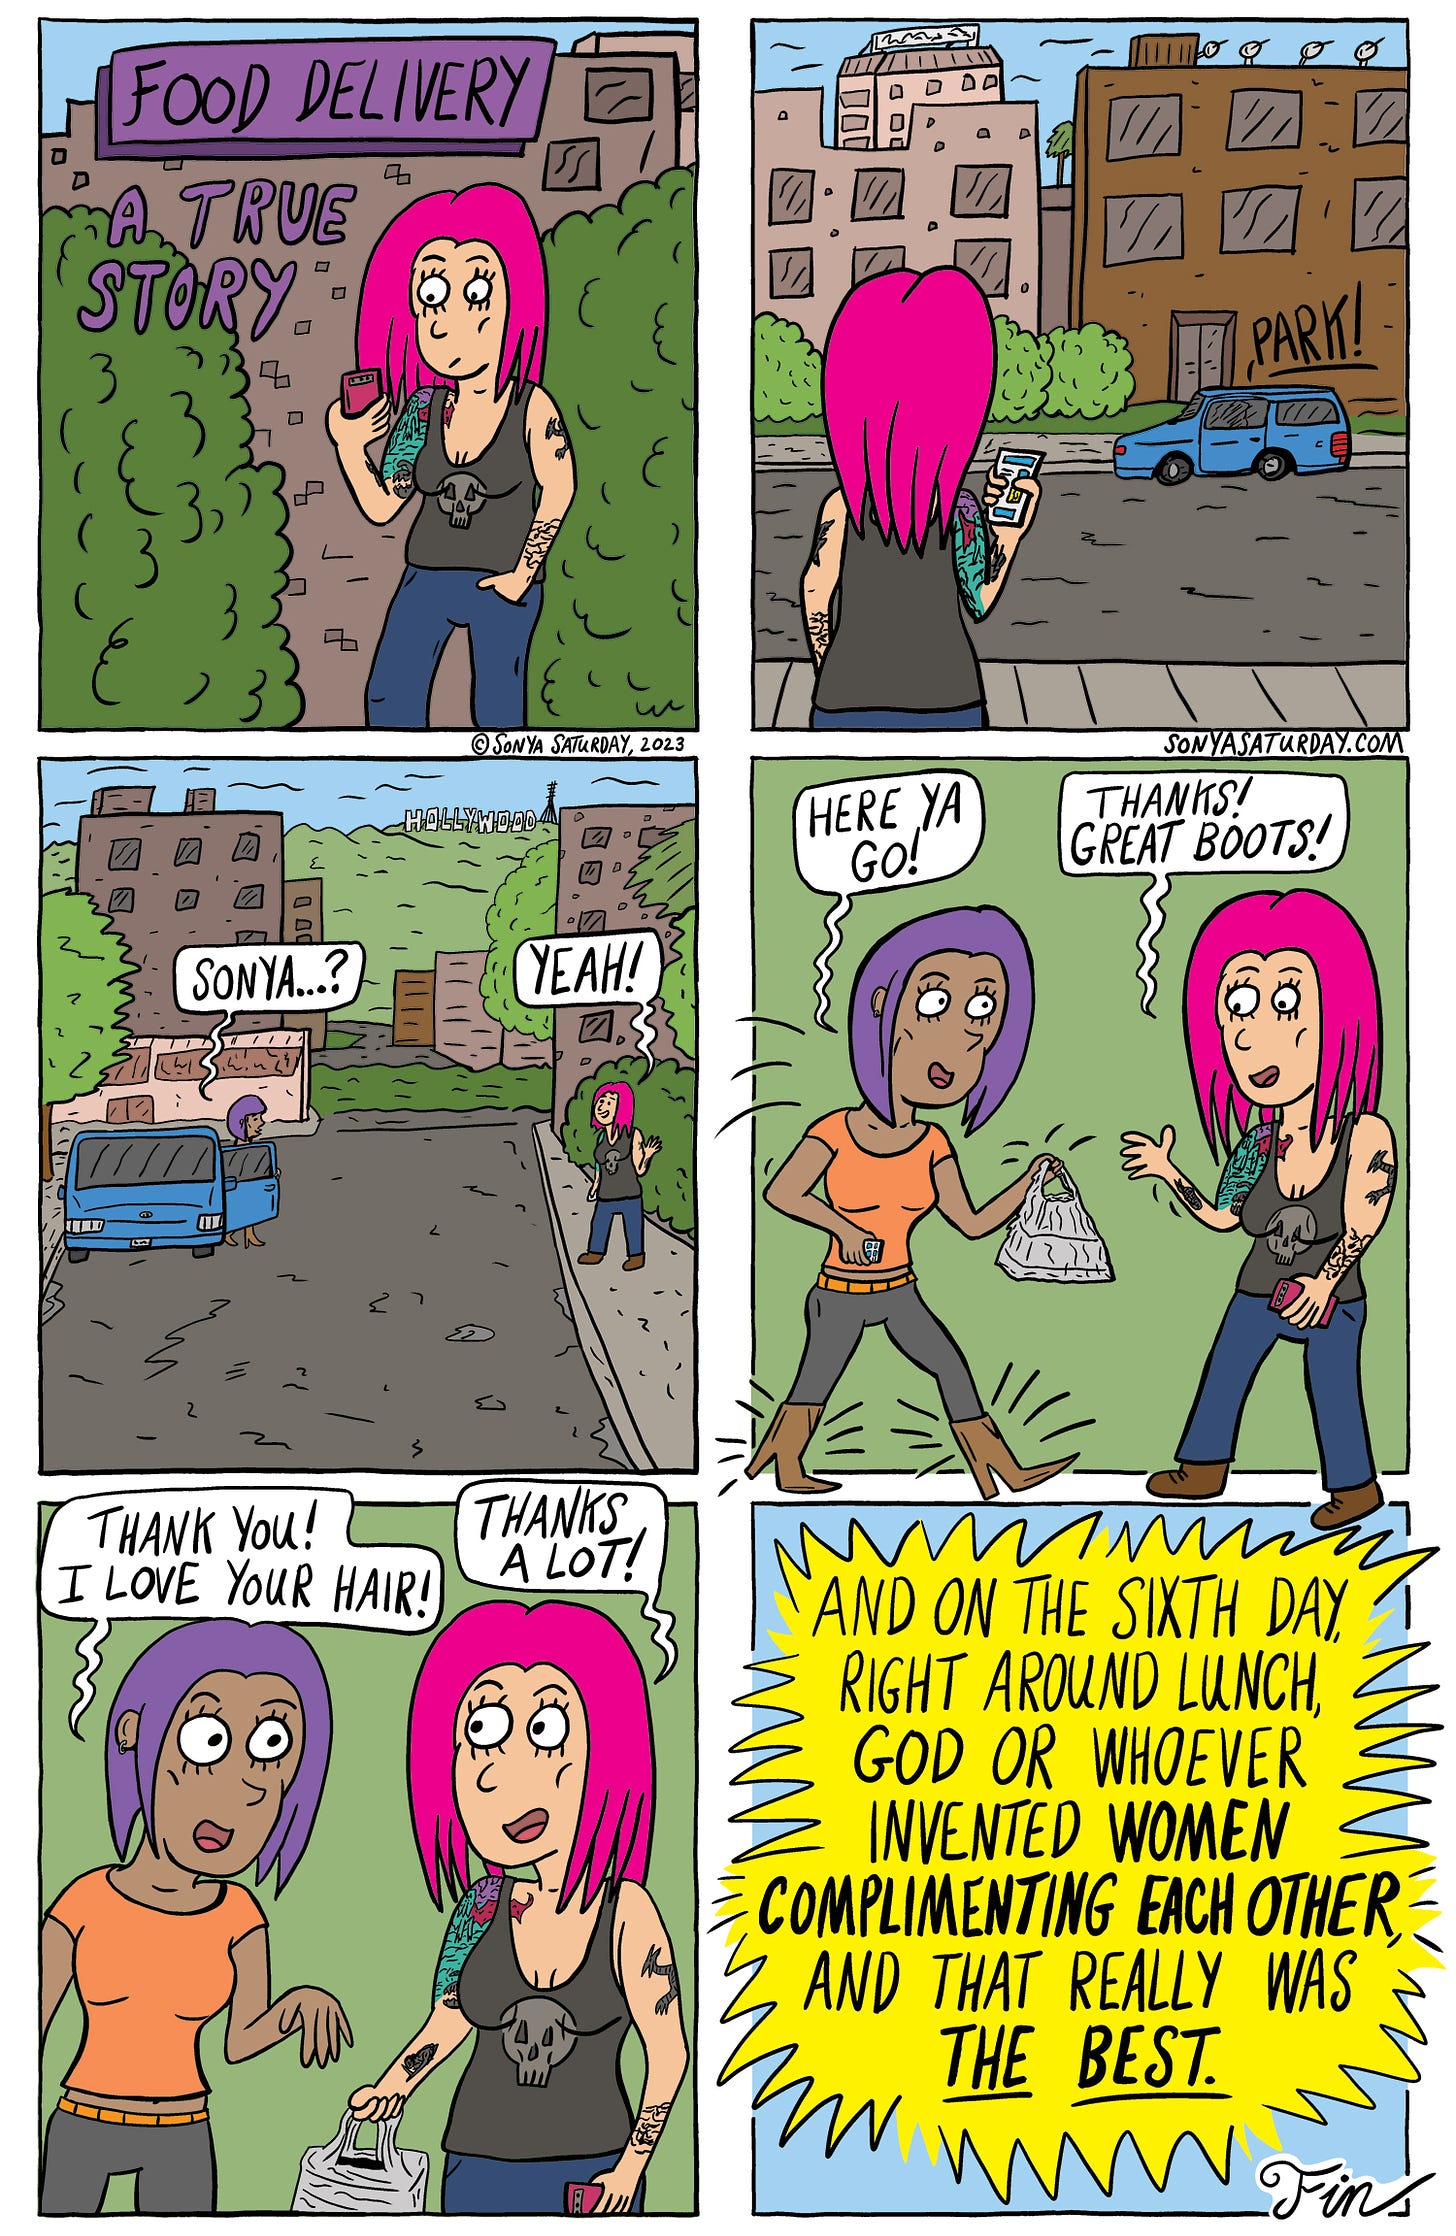 Comic strip about women complementing each other, by Sonya Saturday